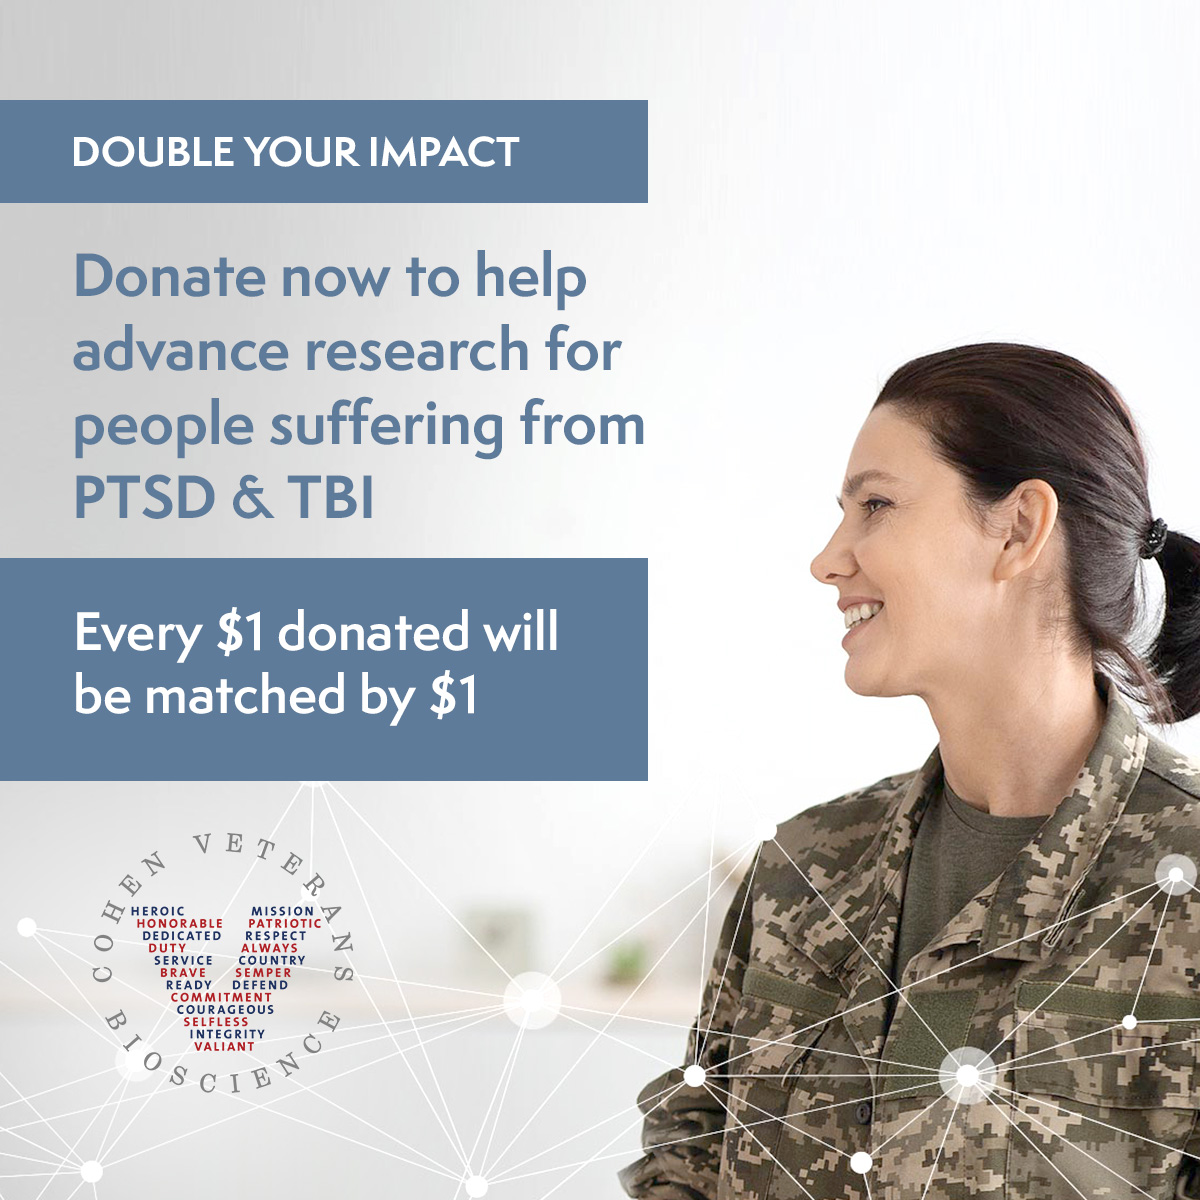 Double Your Impact - Donate now to help advance research for PTSD and TBI